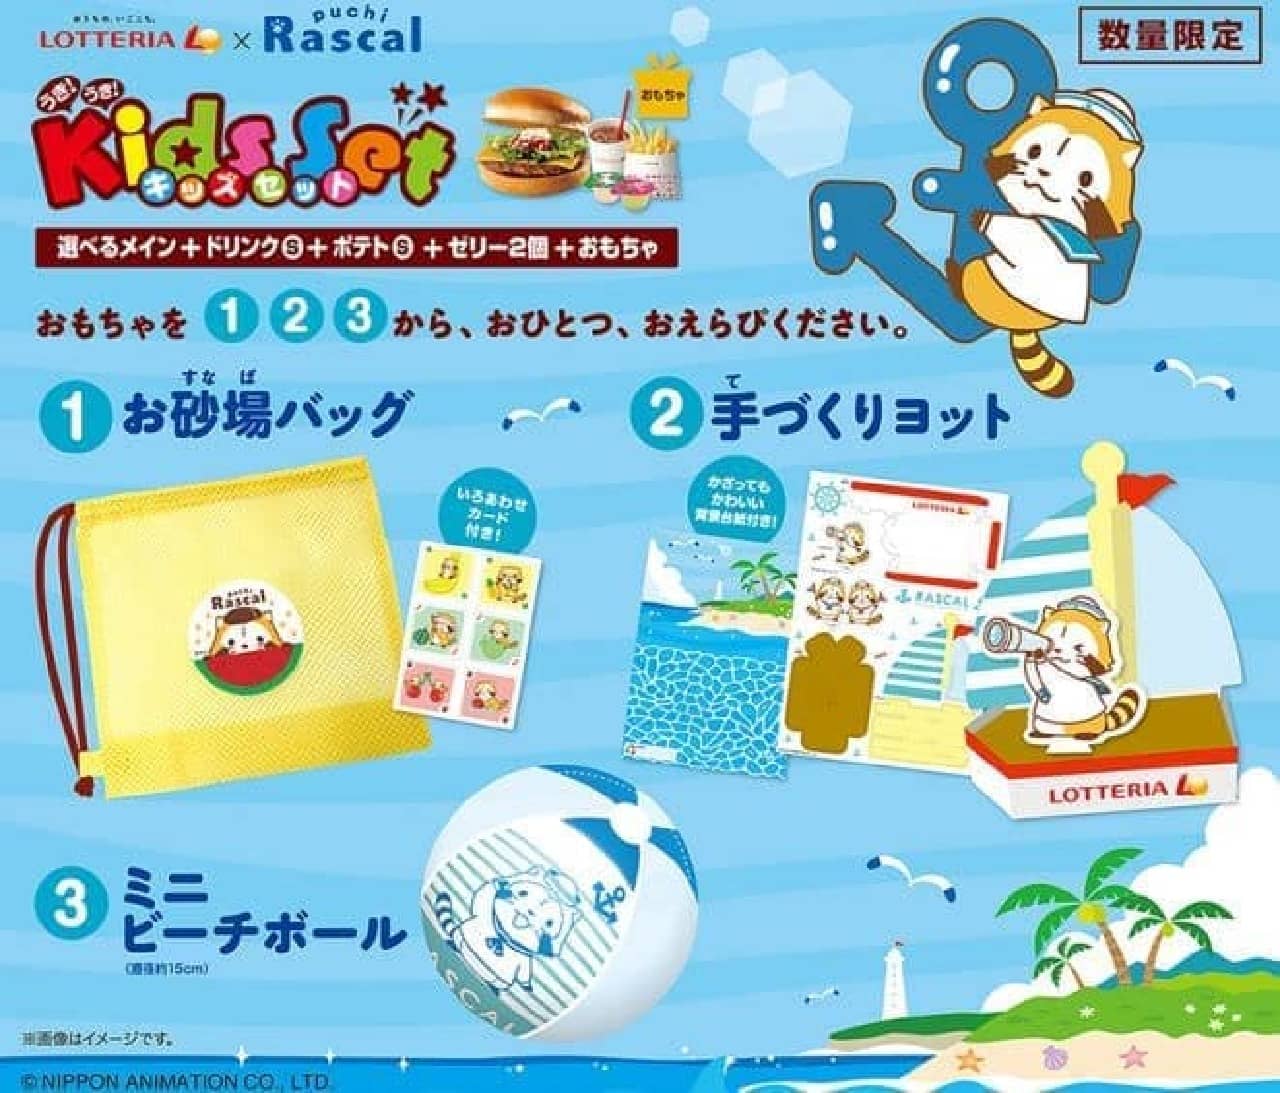 Lotteria "Kids Set" in collaboration with "Rascal the Raccoon"